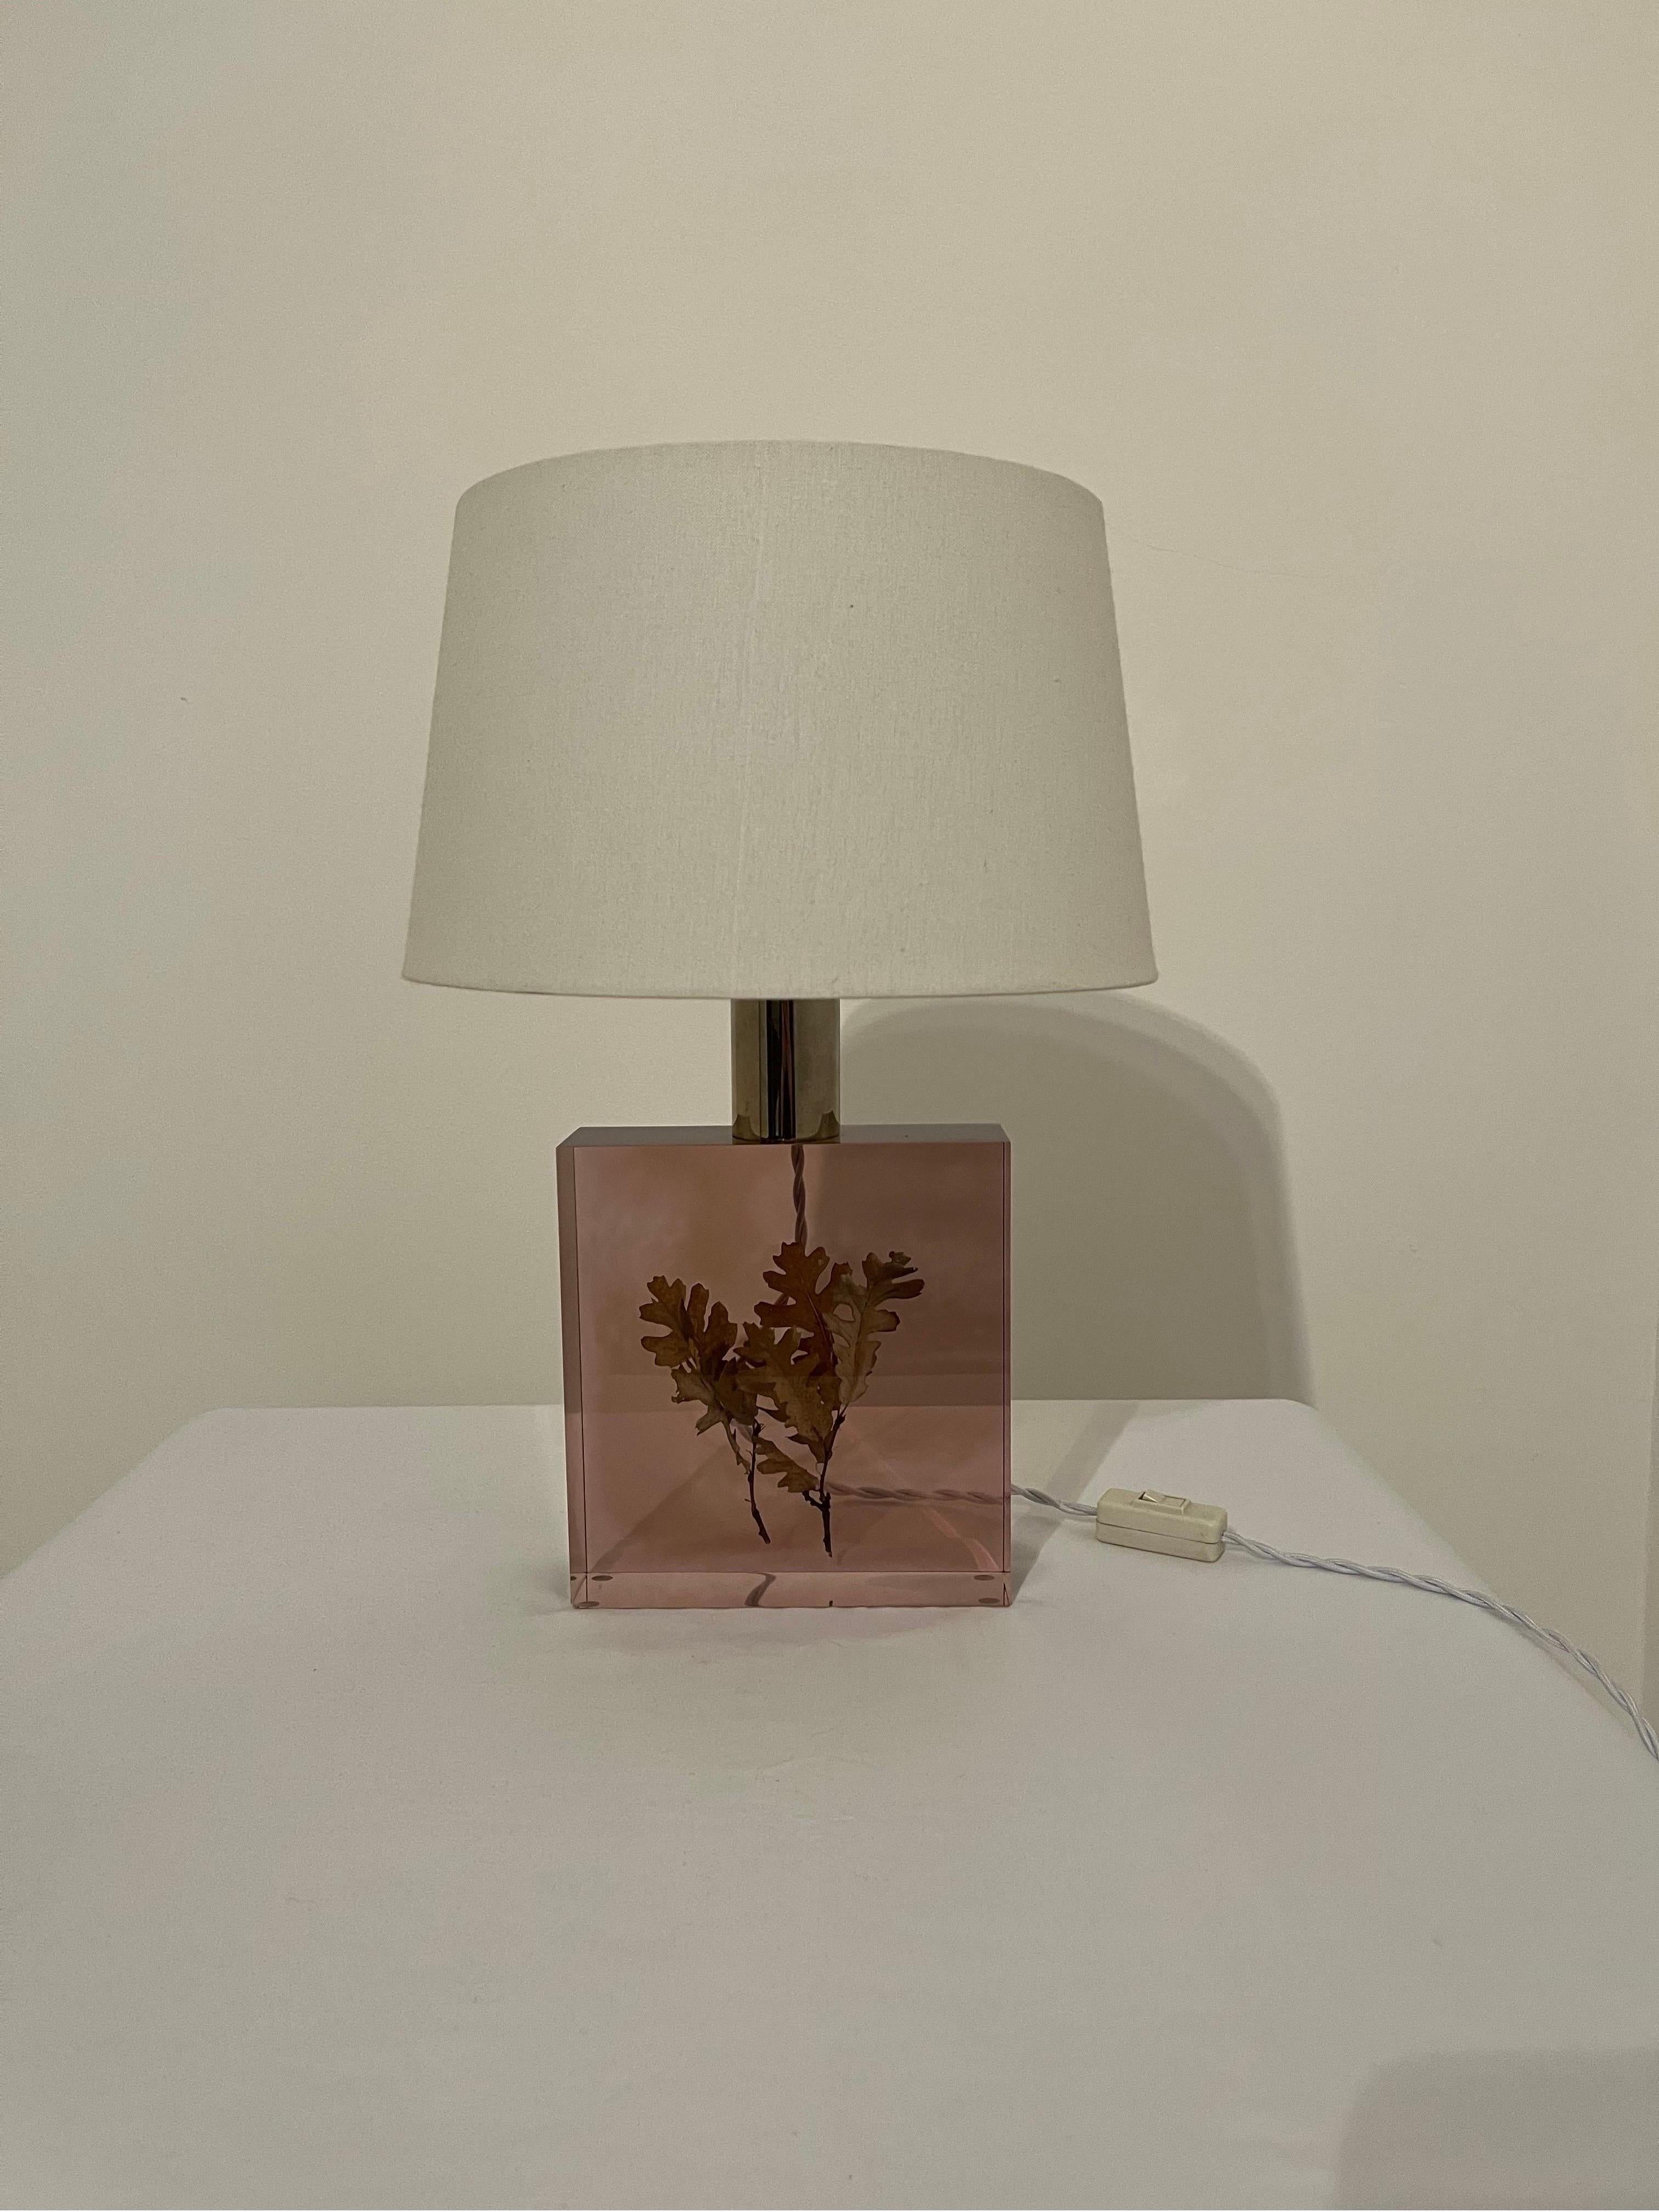 Lucite table lamp with leaf inclusion by Pierre Giraudon France 

Wired with white flex and UK plug. 
Shade not included in sale. 

Excellent overall condition, one very small chip to left front corner shown. 